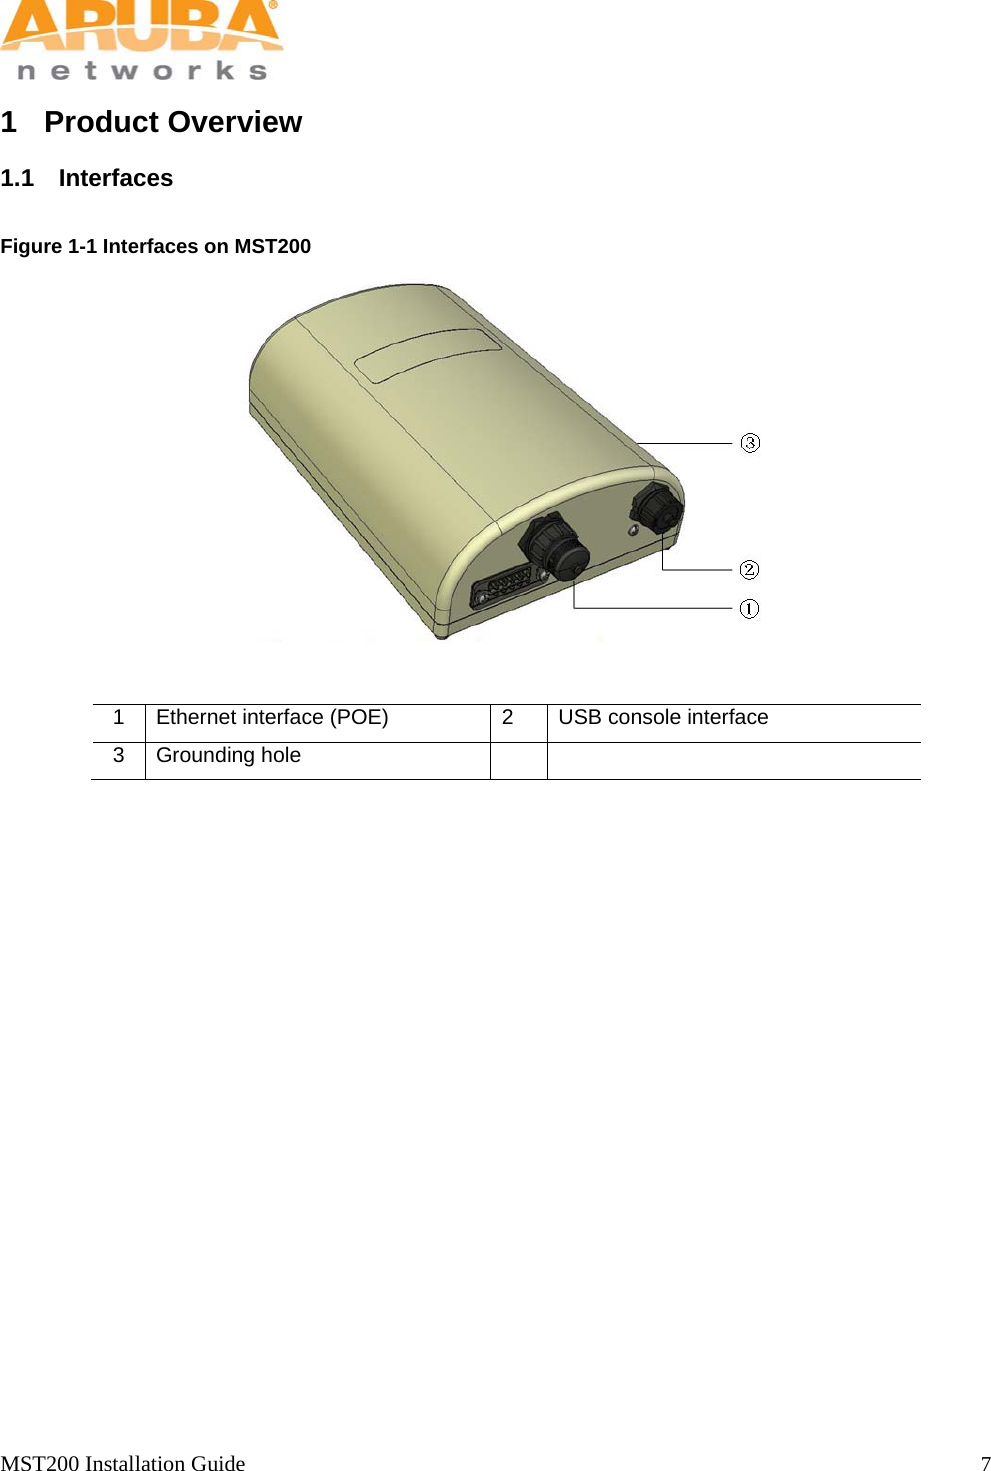   MST200 Installation Guide                                                                  7             1 Product Overview 1.1 Interfaces  Figure 1-1 Interfaces on MST200   1  Ethernet interface (POE)  2  USB console interface 3 Grounding hole      